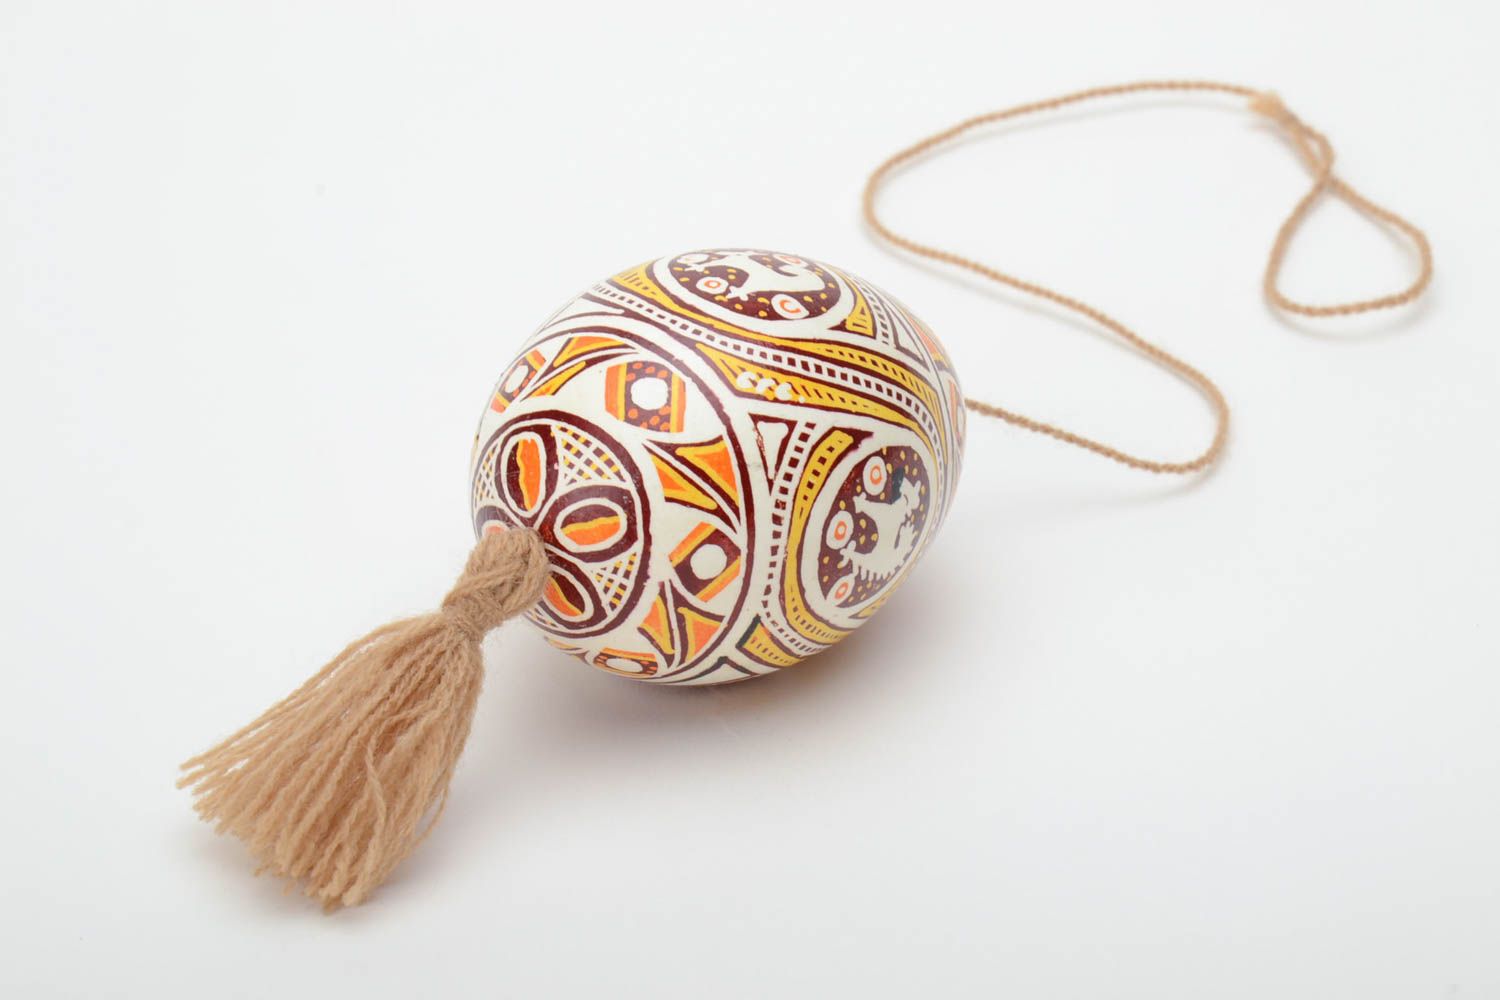 Homemade painted Easter egg with tassel and patterns created using waxing technique photo 4